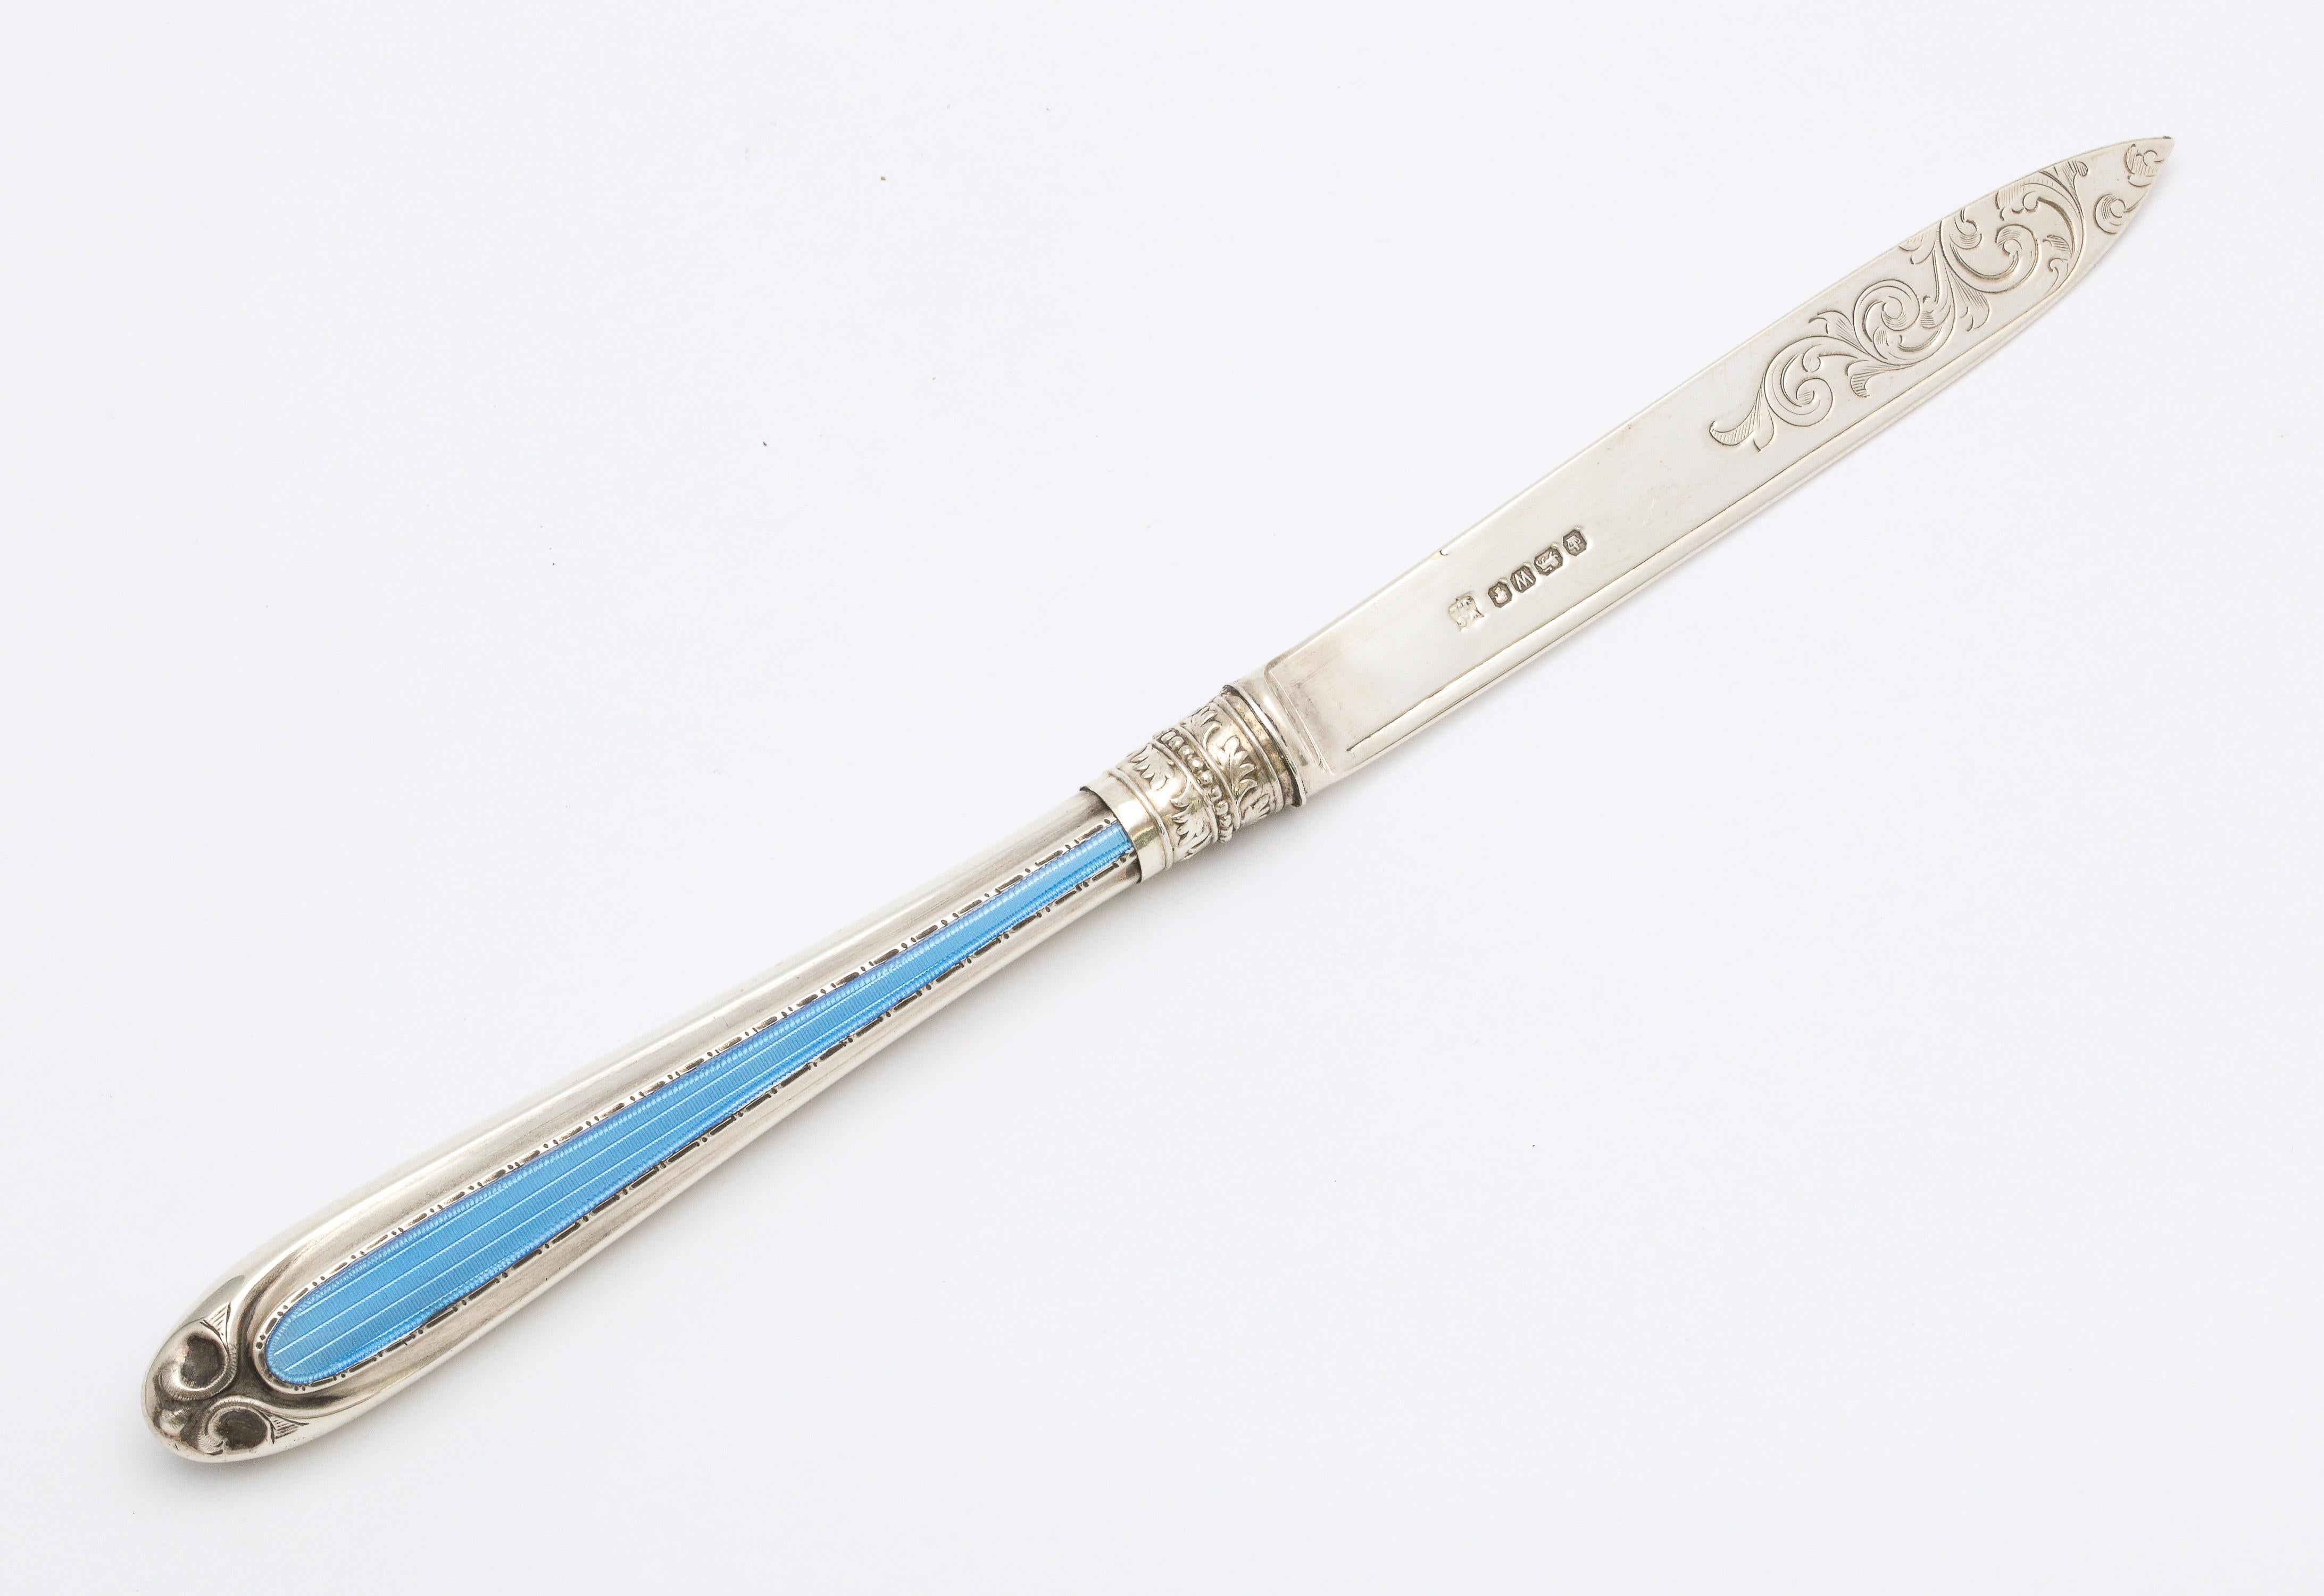 Victorian, sterling silver and blue guilloche enamel letter opener, Sheffield, England, year hallmarked for 1888, W. Gibson and J. Langman - makers. Measures 9 inches long x 3/4 inch deep x 1/2 inch high when lying flat. Enamel is on one side of the